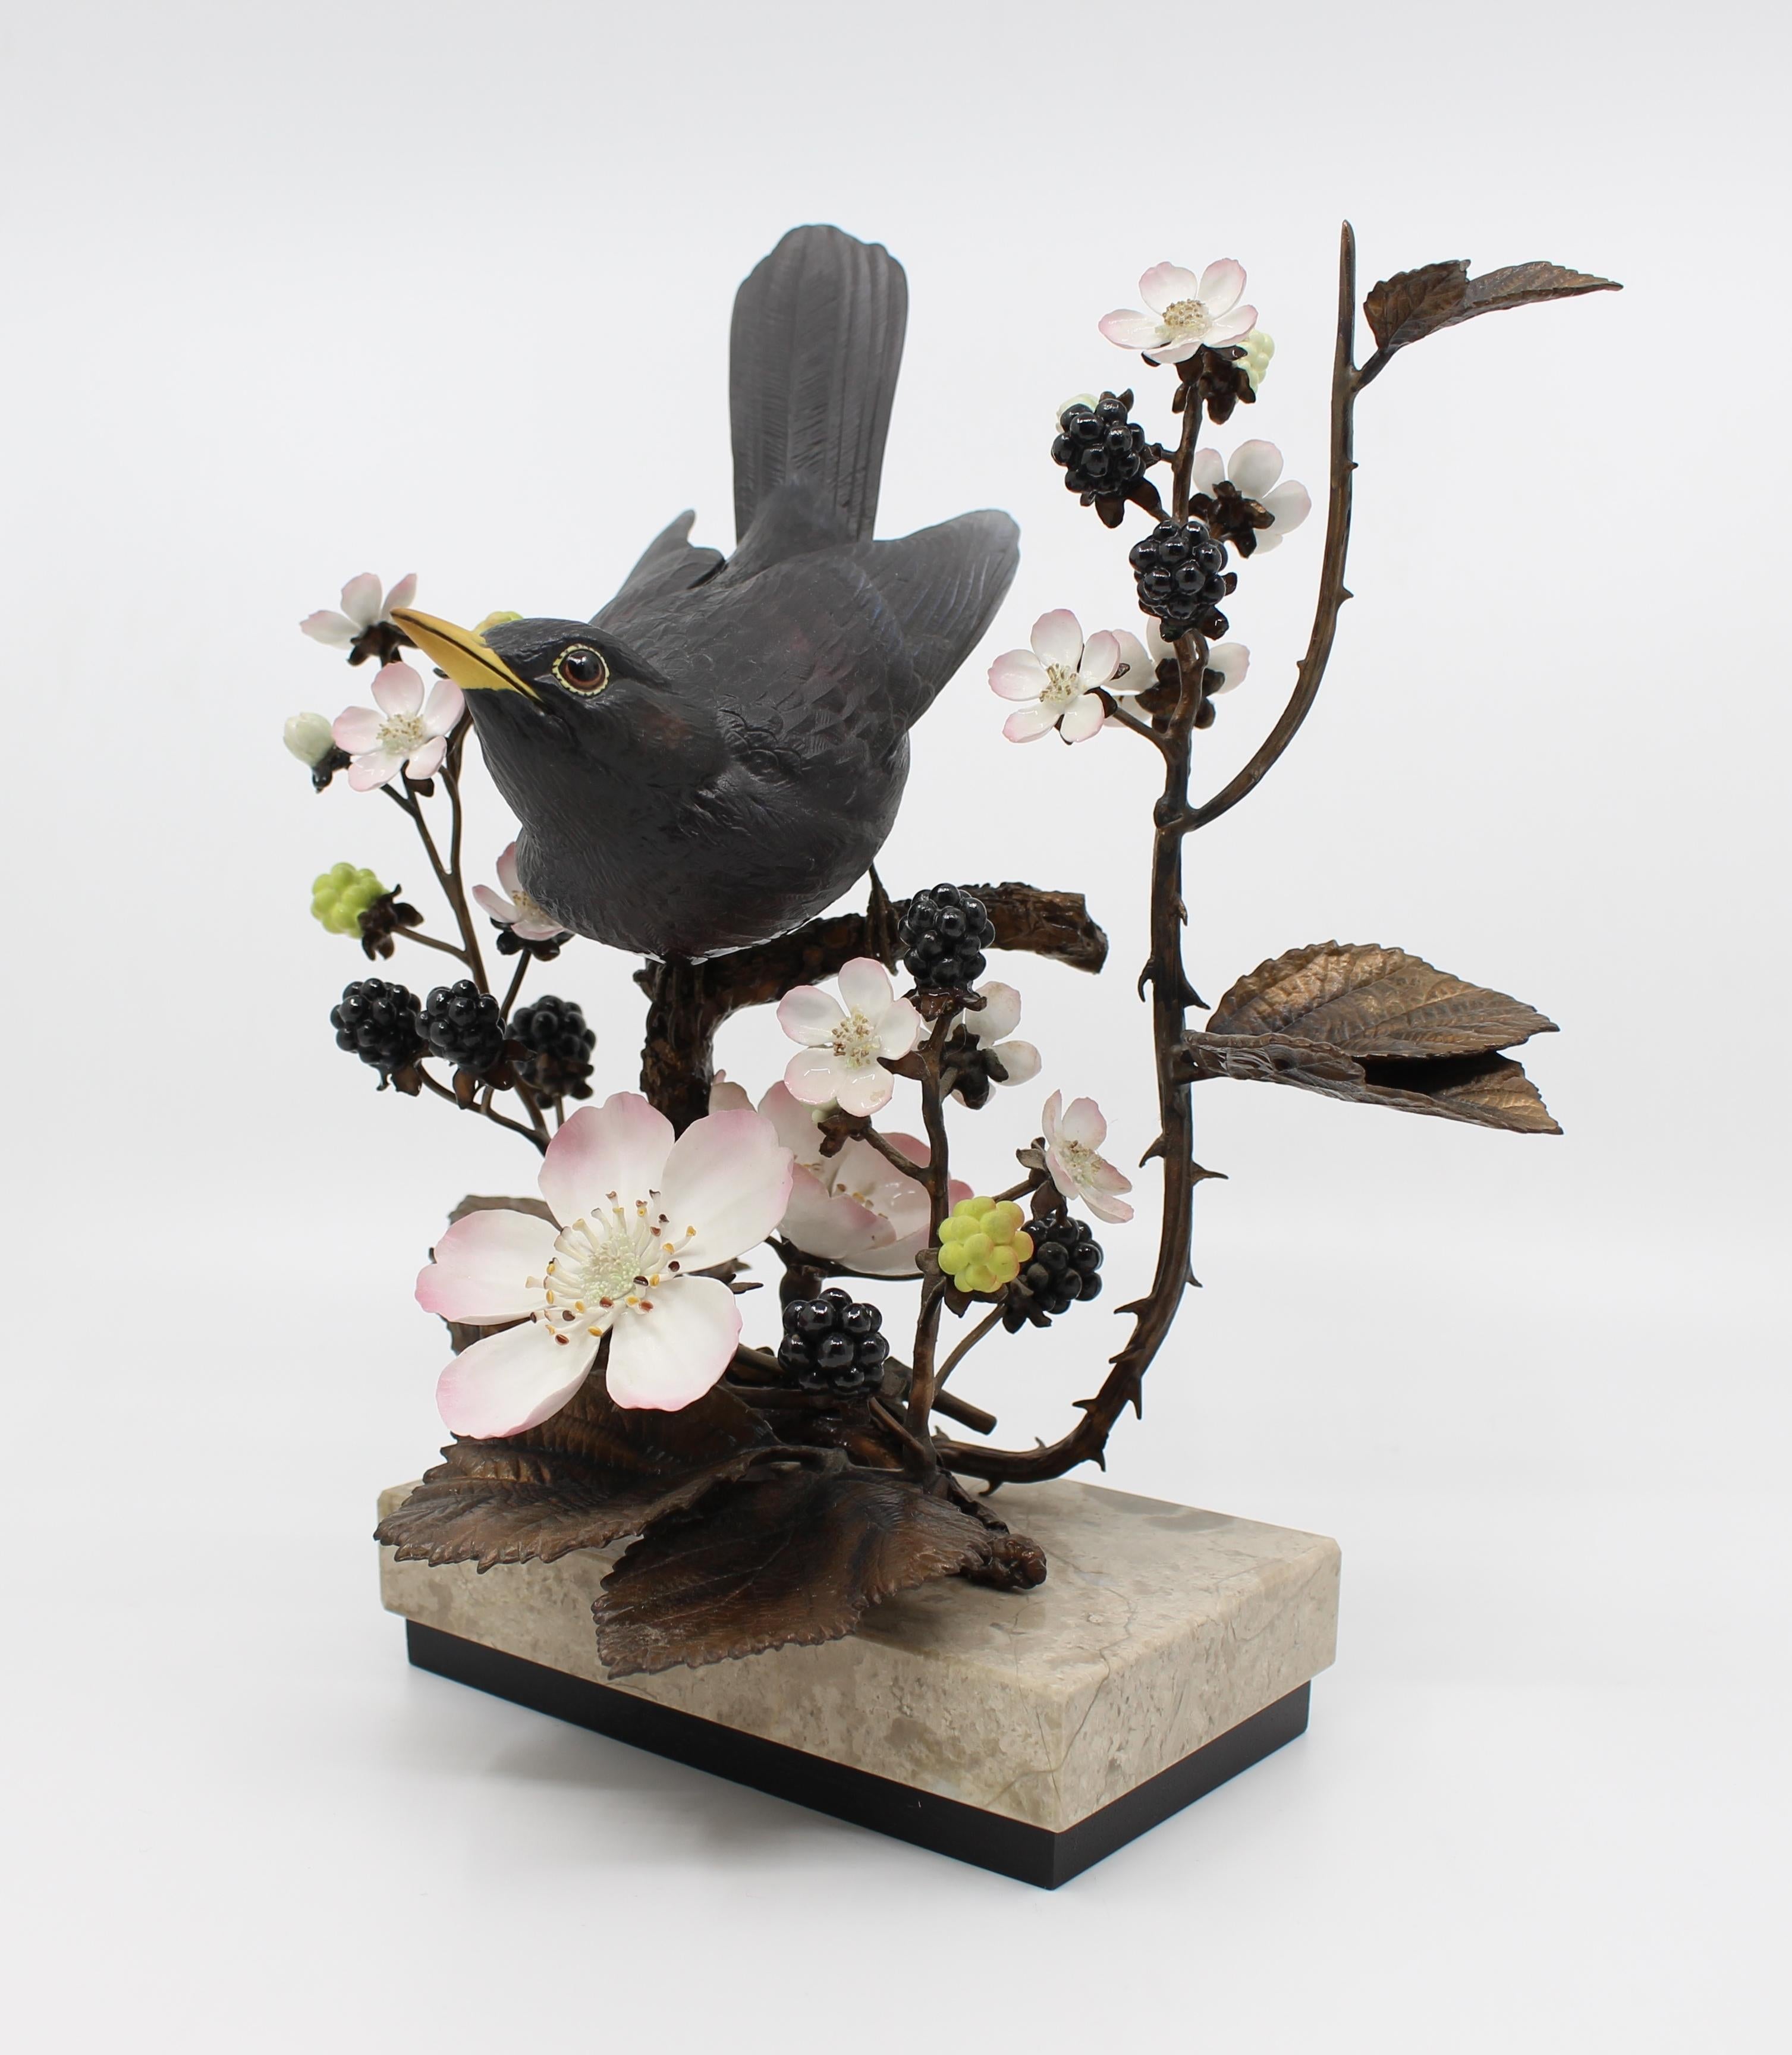 Manufacturer Albany Fine China Ltd England, Worcester
Title Blackbird
Composition porcelain sculpture on bronze mount with marble and wood base
Measures: Height 23 cm / 9 in
Modeller David Burnham-Smith
Limited Edition 426 of 500
Condition